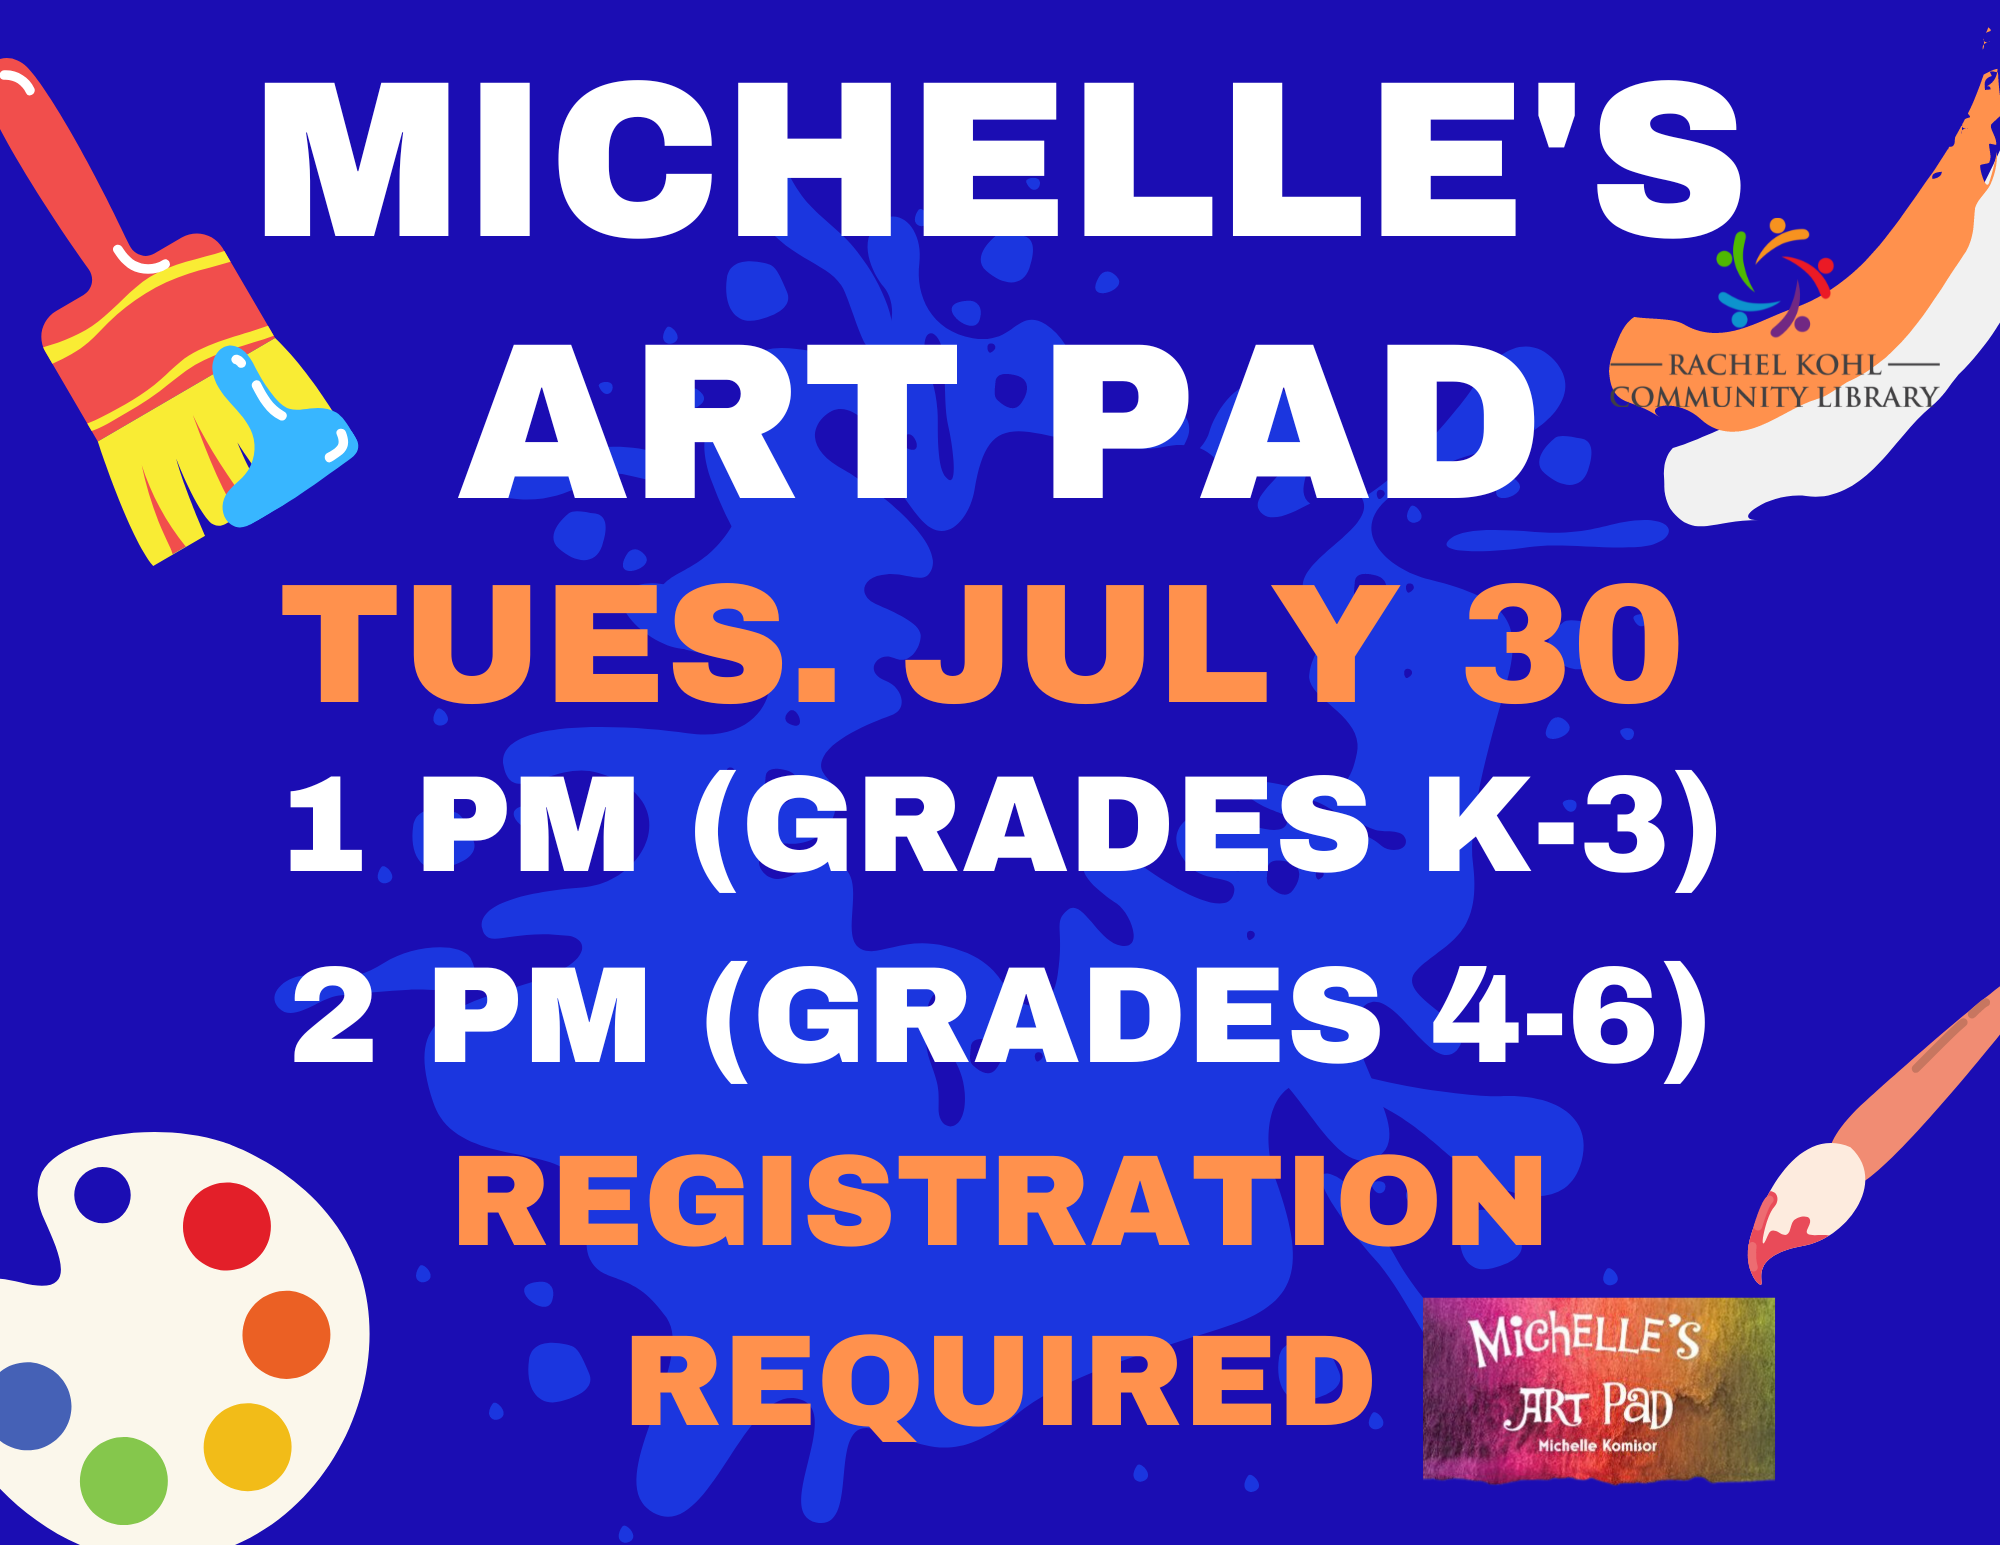 Michelle's Art Pad Tues. July 30 1 PM (Grades K-3) 2 PM (Grades 4-6) Registration Required